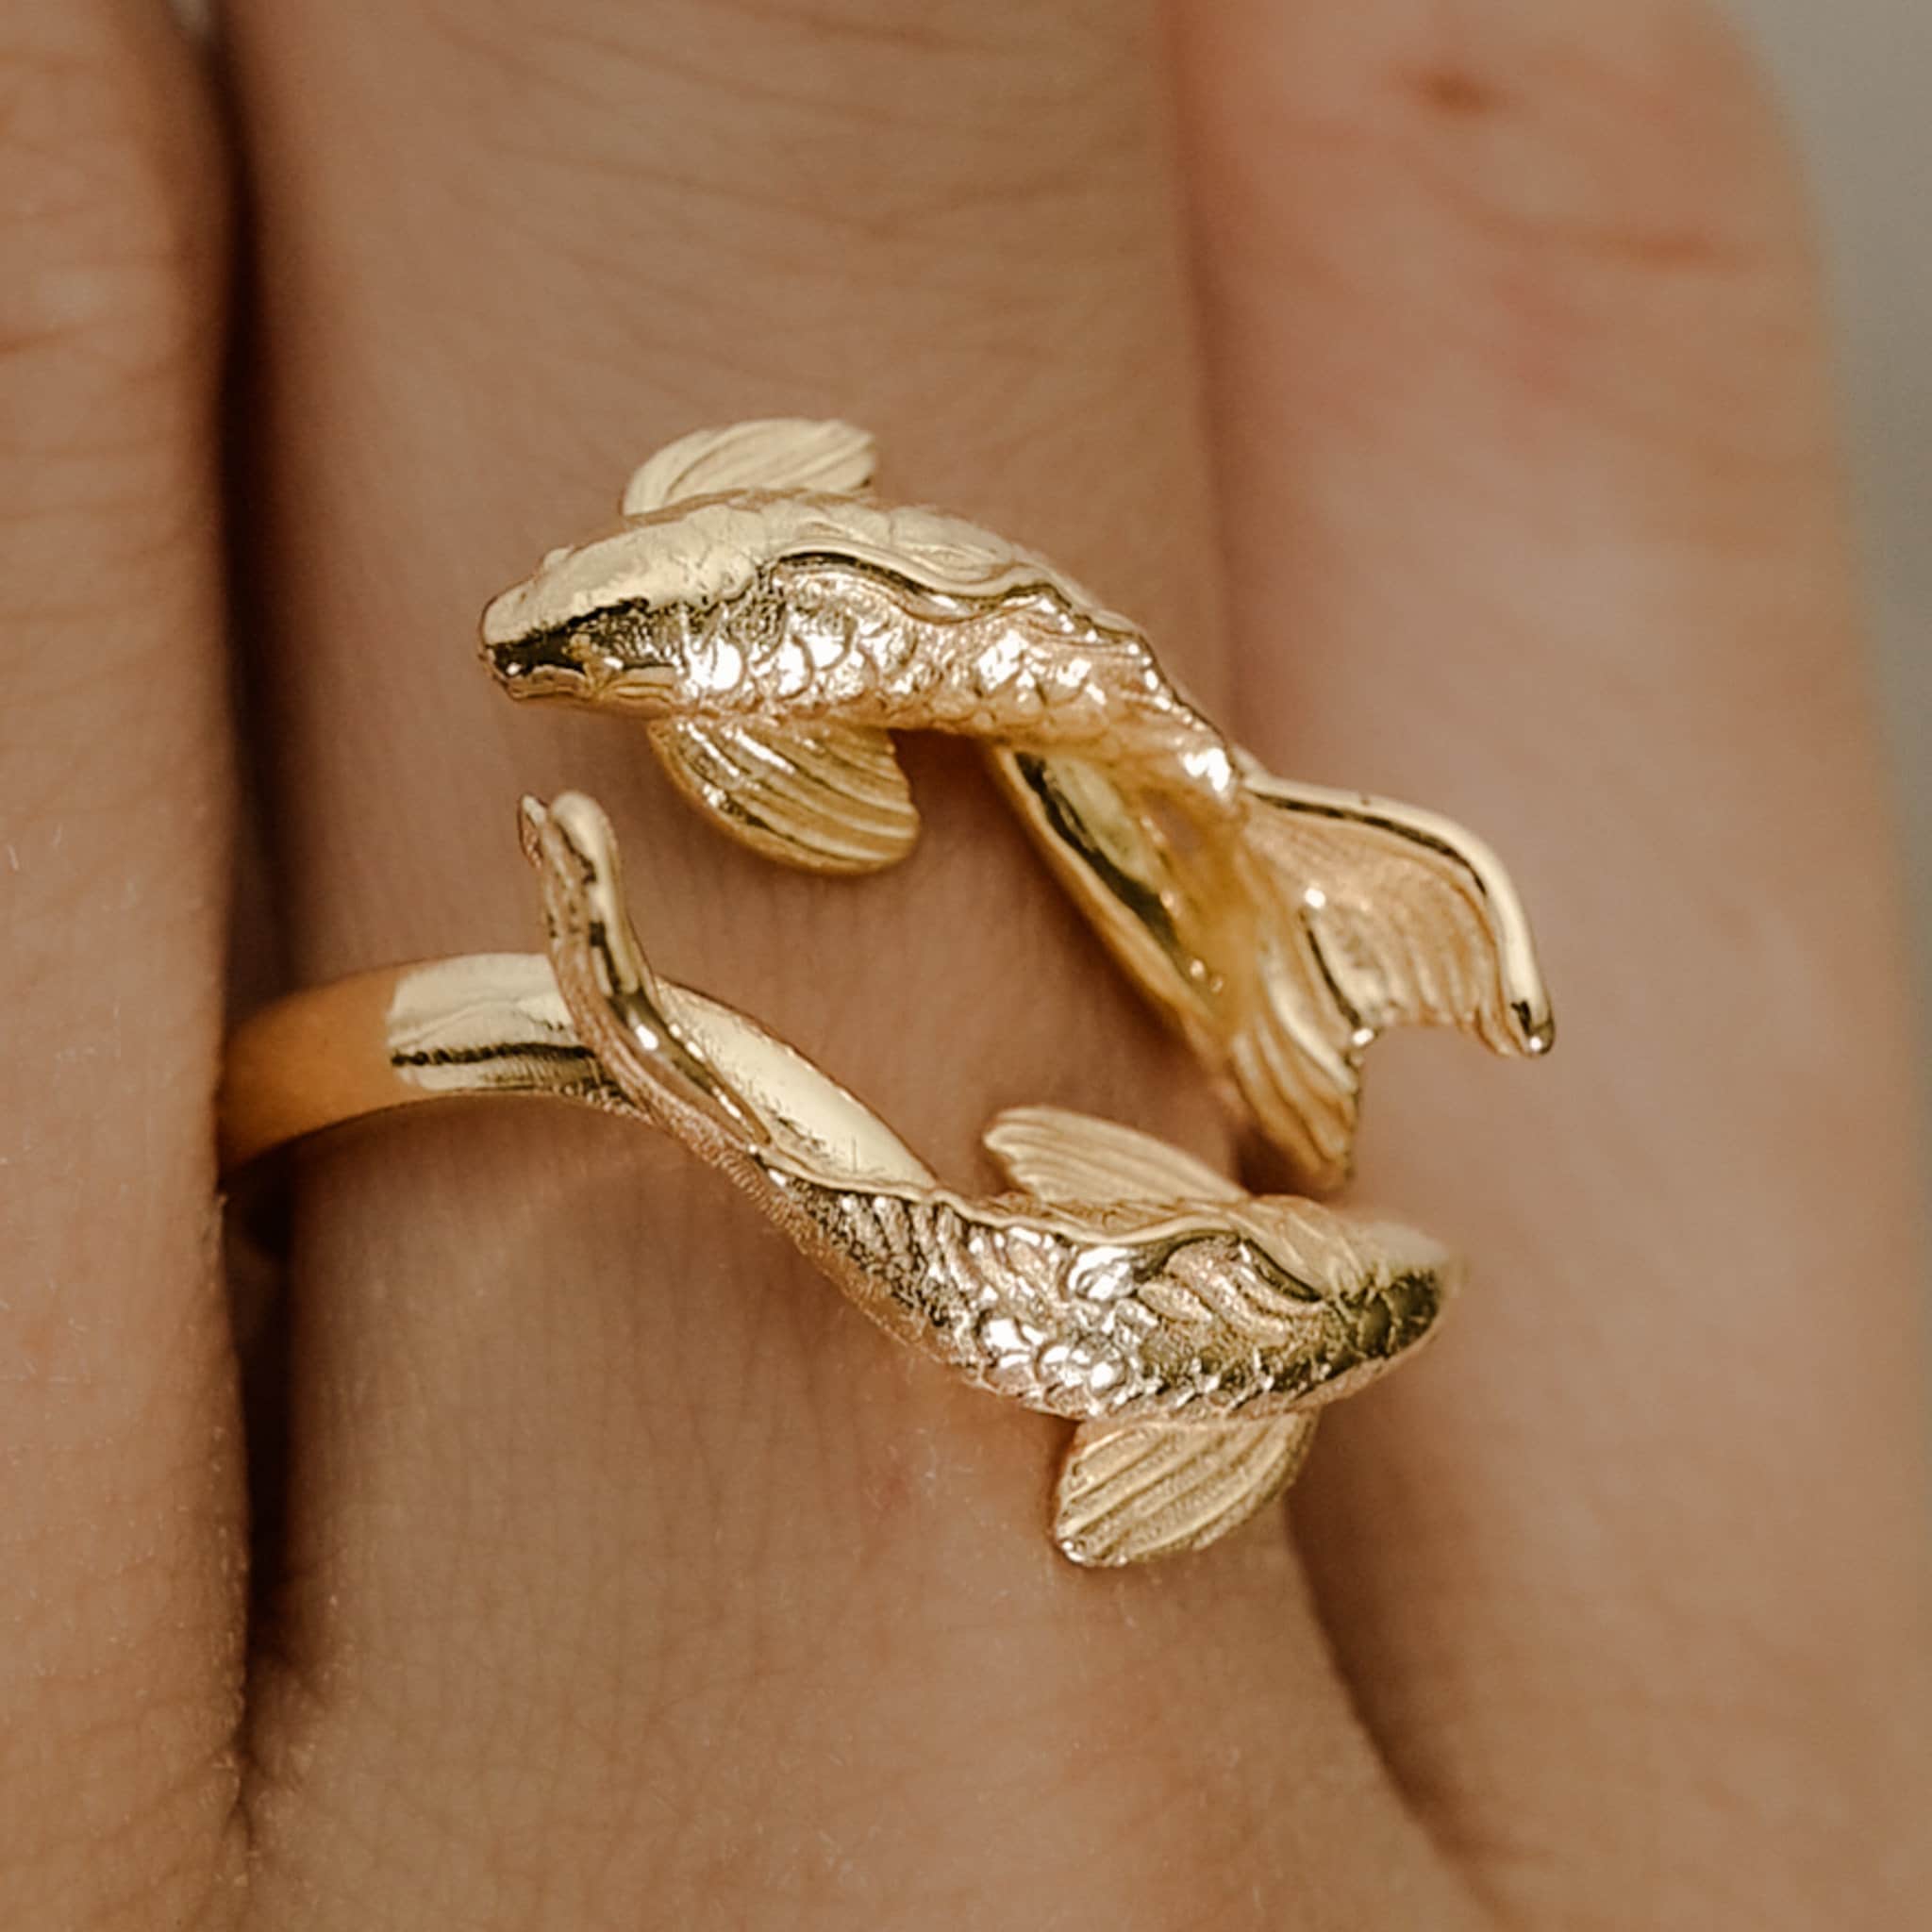 Koi Fish Ring | Japanese Ring, Y2K Jewelry, Adjustable Grunge Ring –  Present Realm